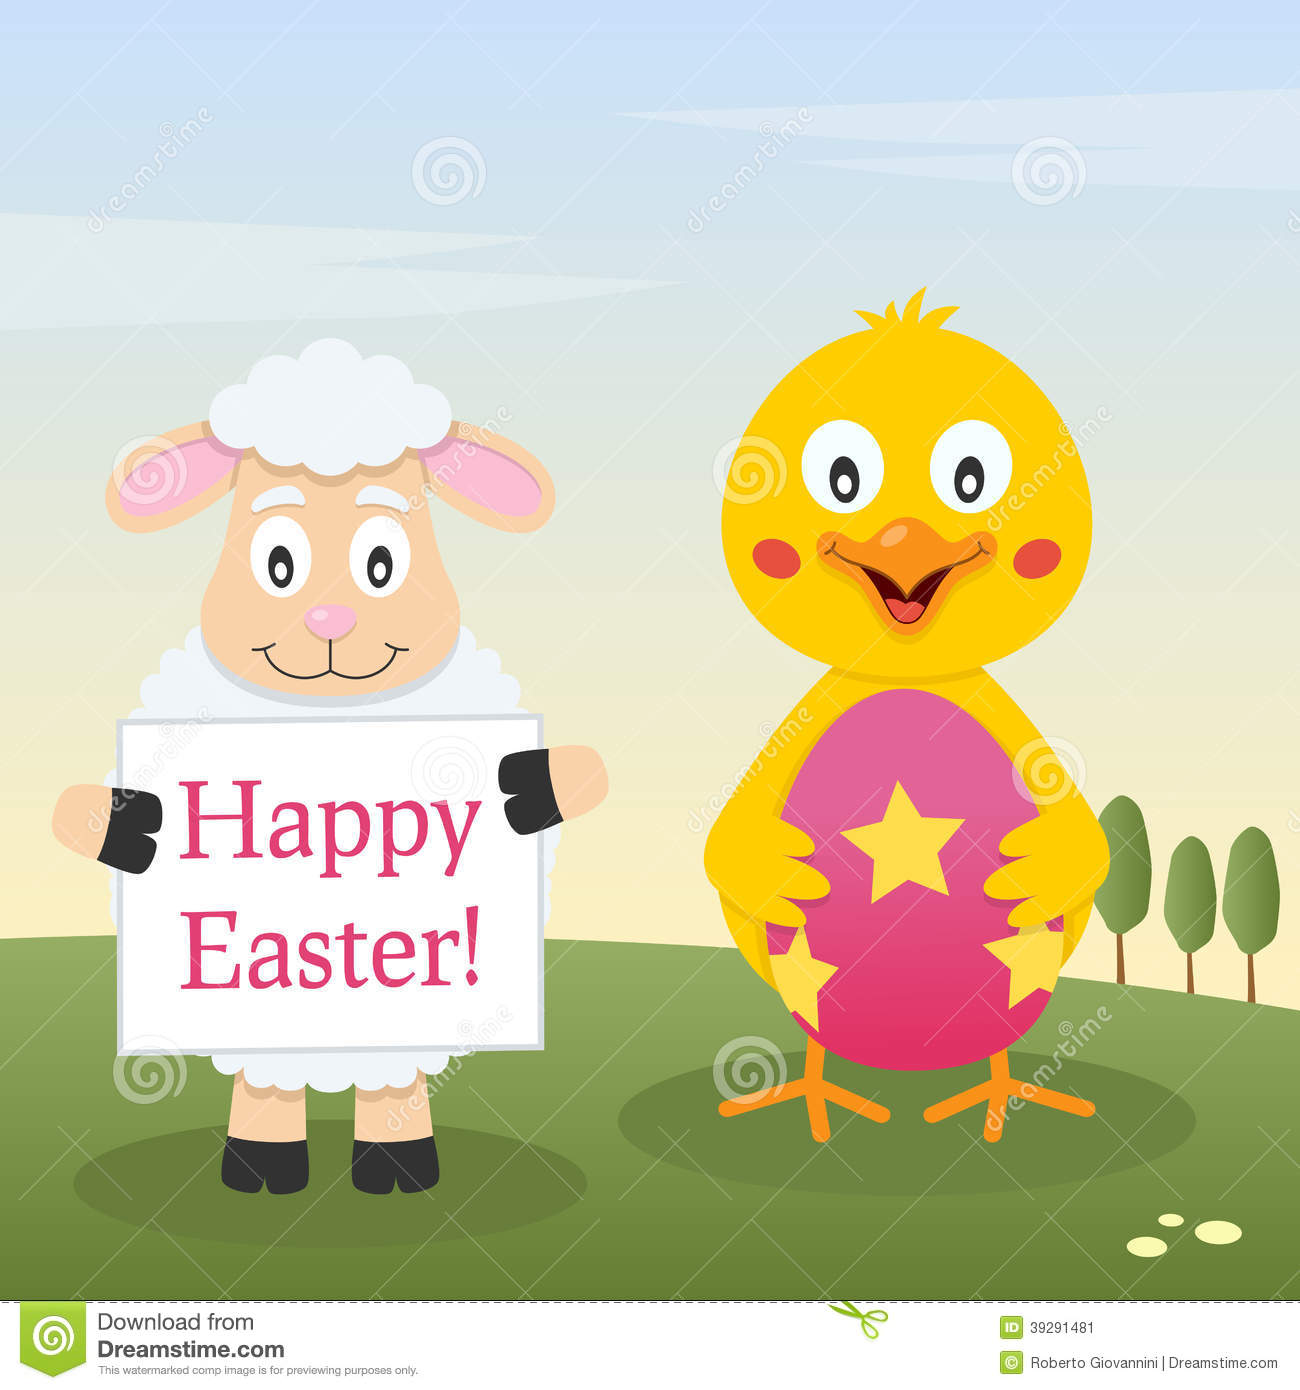 Happy Easter Greeting Card With A Cute Chick Holding A Easter Egg